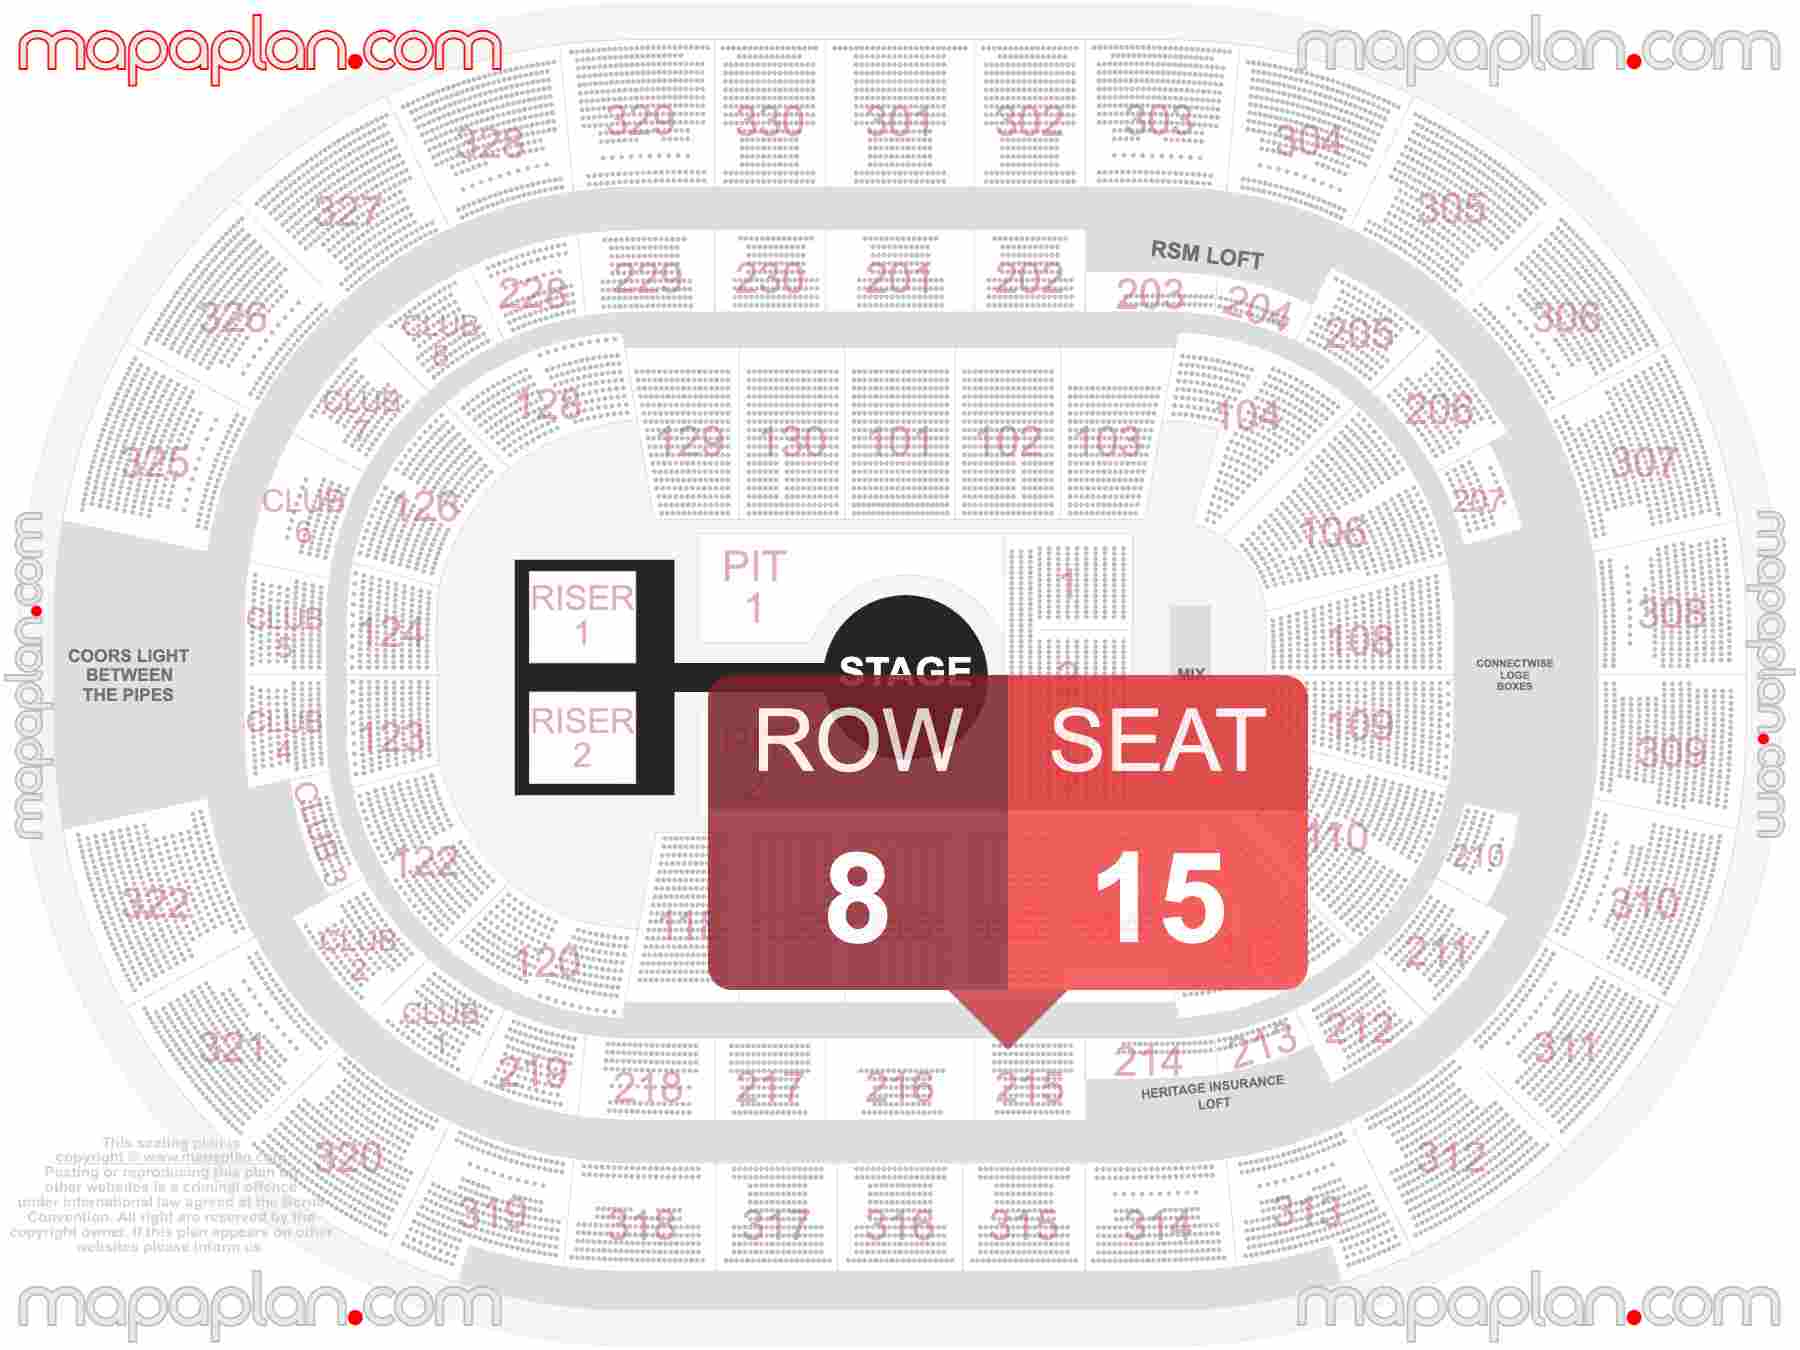 Tampa Amalie Arena seating chart Concert with extended catwalk runway B-stage seating chart with exact section numbers showing best rows and seats selection 3d layout - Best interactive seat finder tool with precise detailed location data